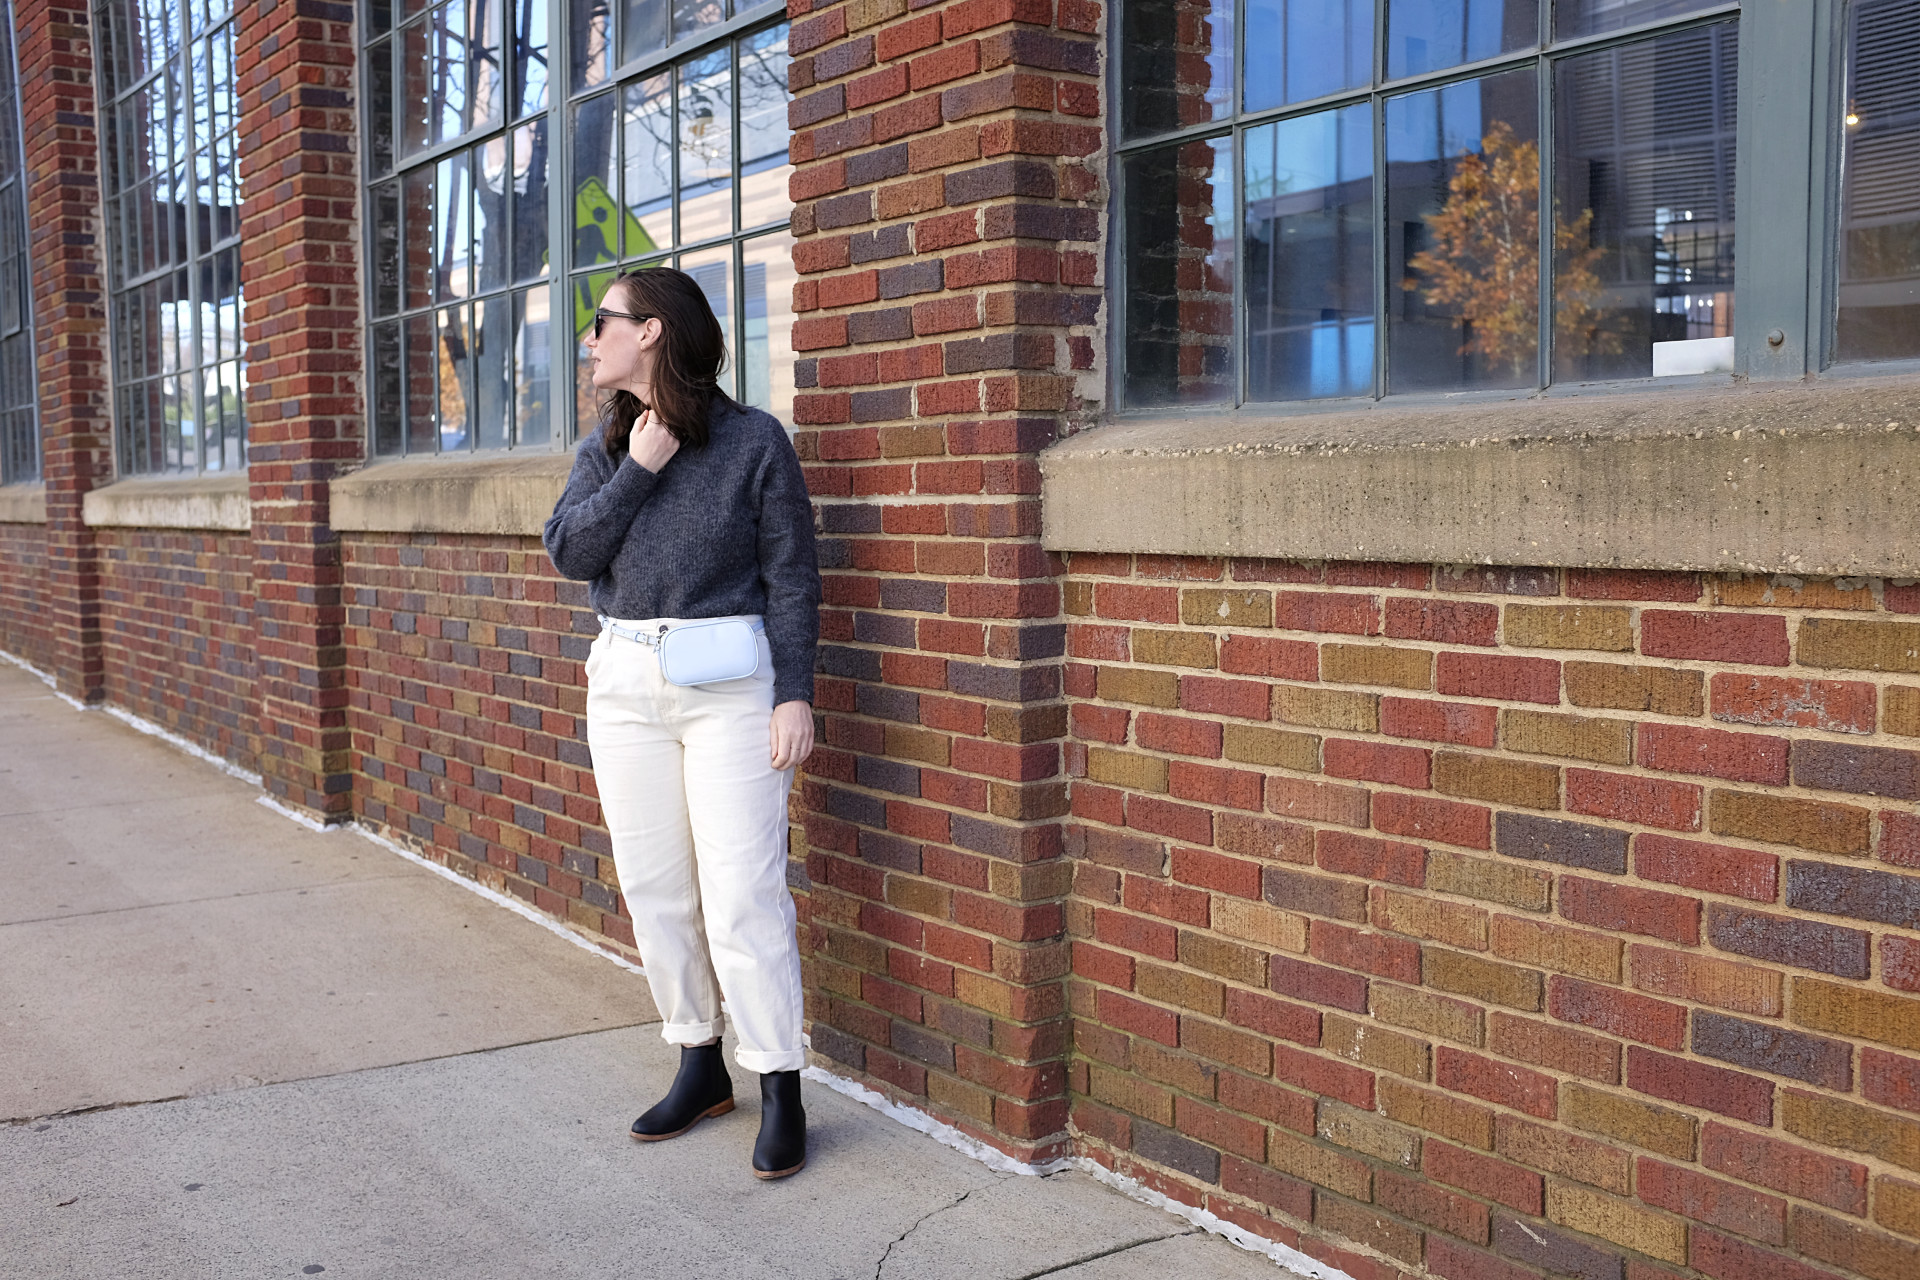 Alyssa is standing in front of a brick building. She is wearing a grey sweater with off-white pants, black sunglasses, a light blue belt bag, and black boots. She is looking off to her right.